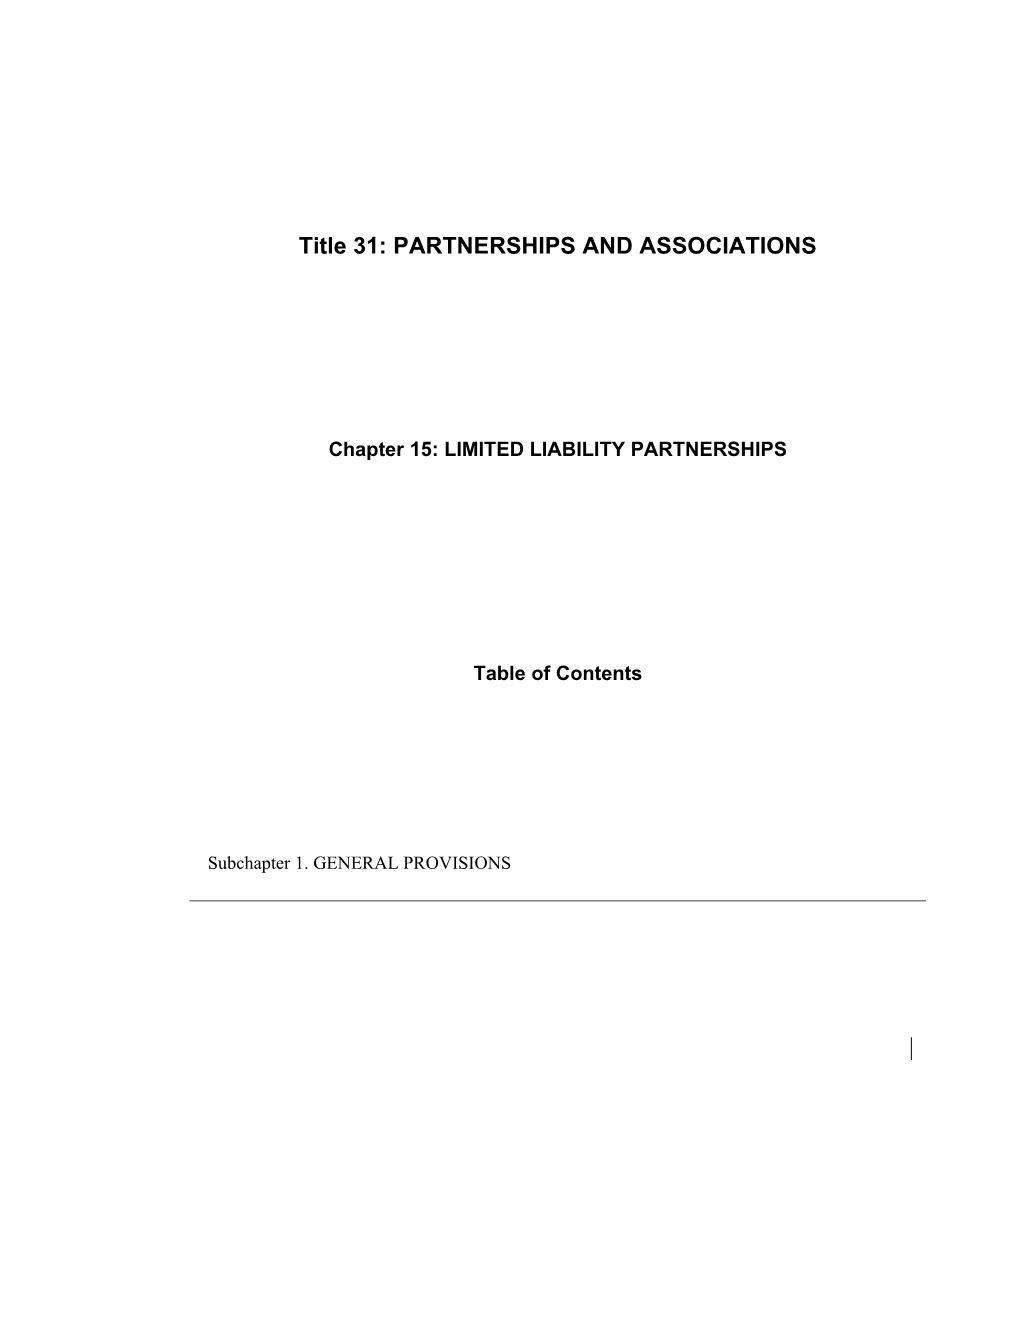 MRS Title 31, Chapter15: LIMITED LIABILITY PARTNERSHIPS